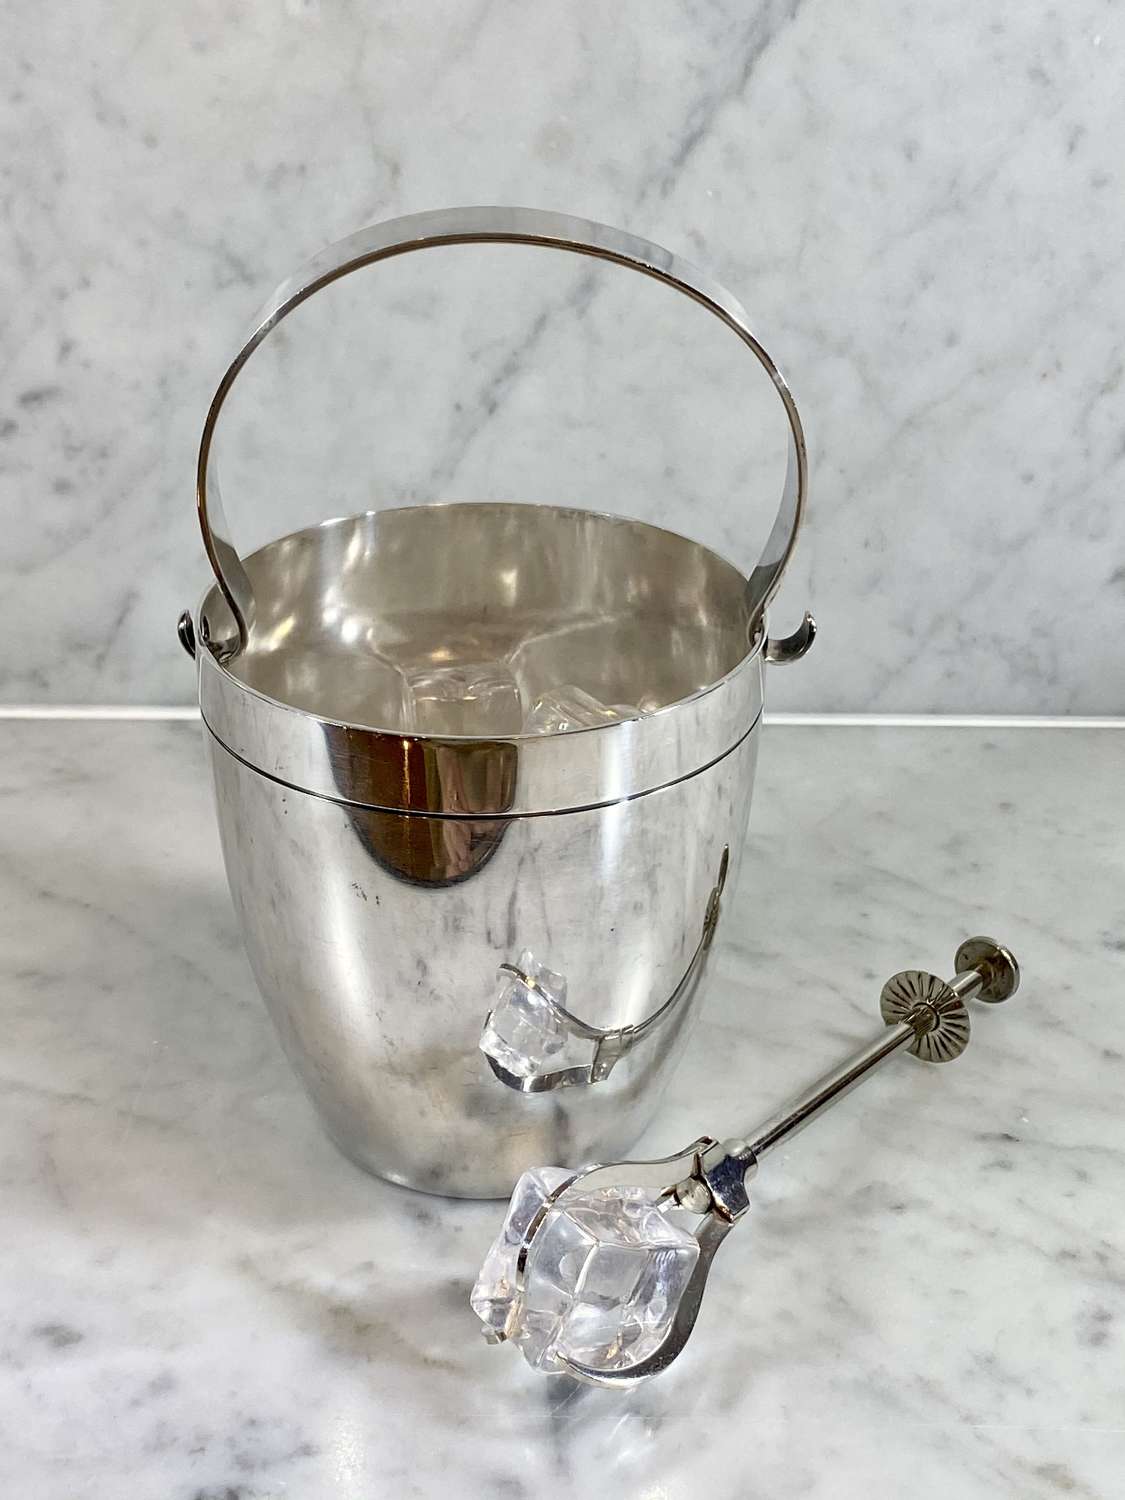 Wiskemann silver plated ice bucket & matching ice grabbers